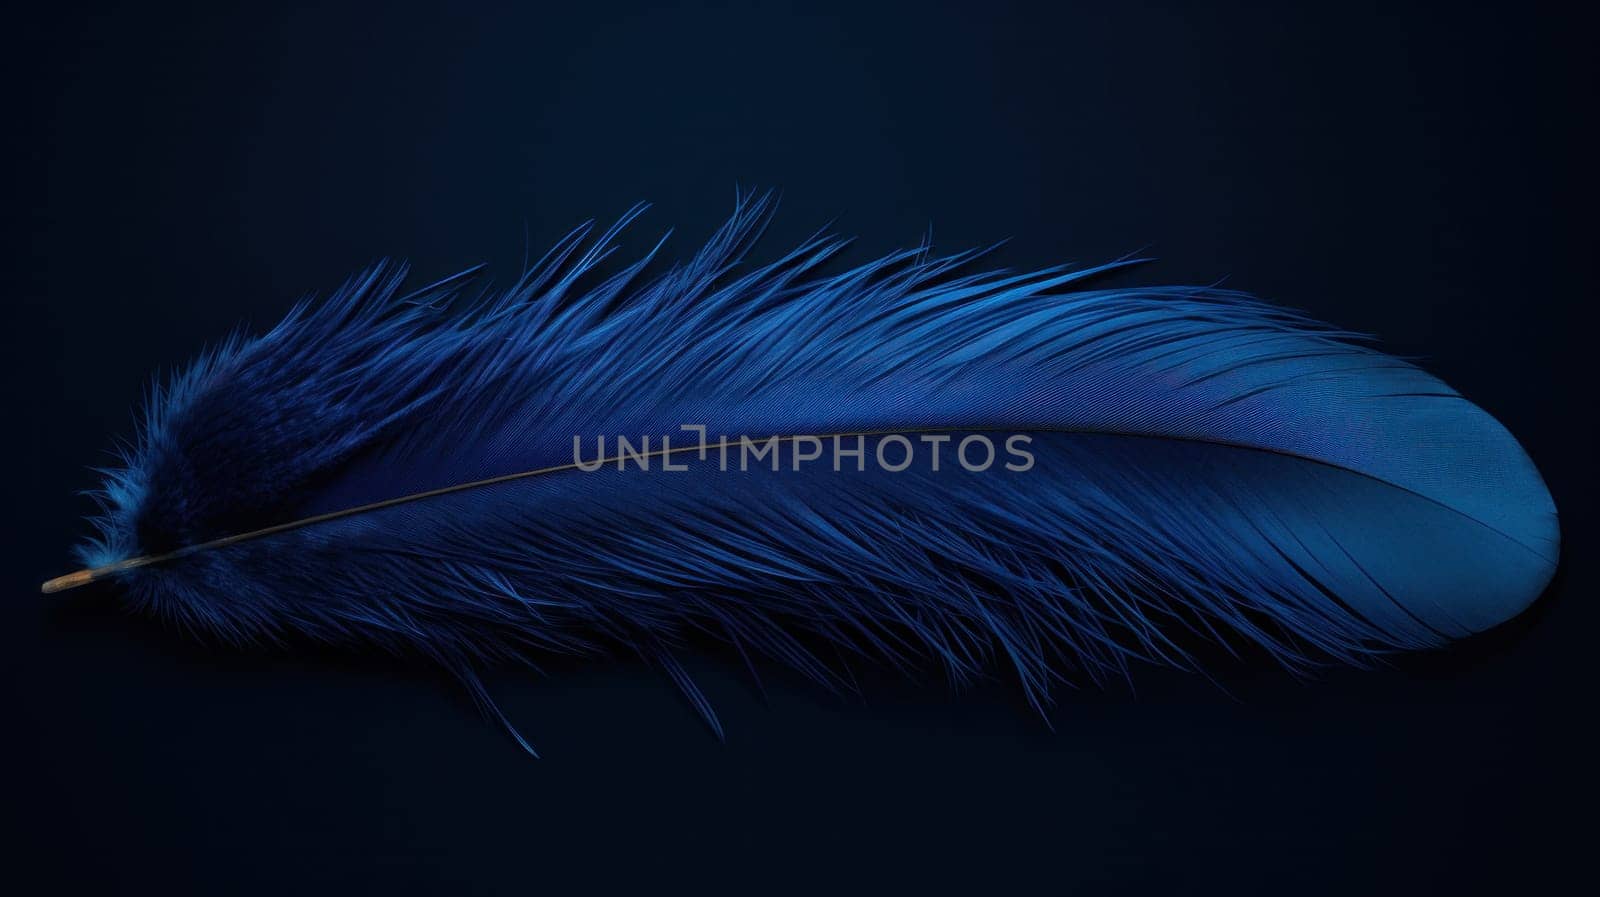 A blue feather laying on a black background with no other objects, AI by starush